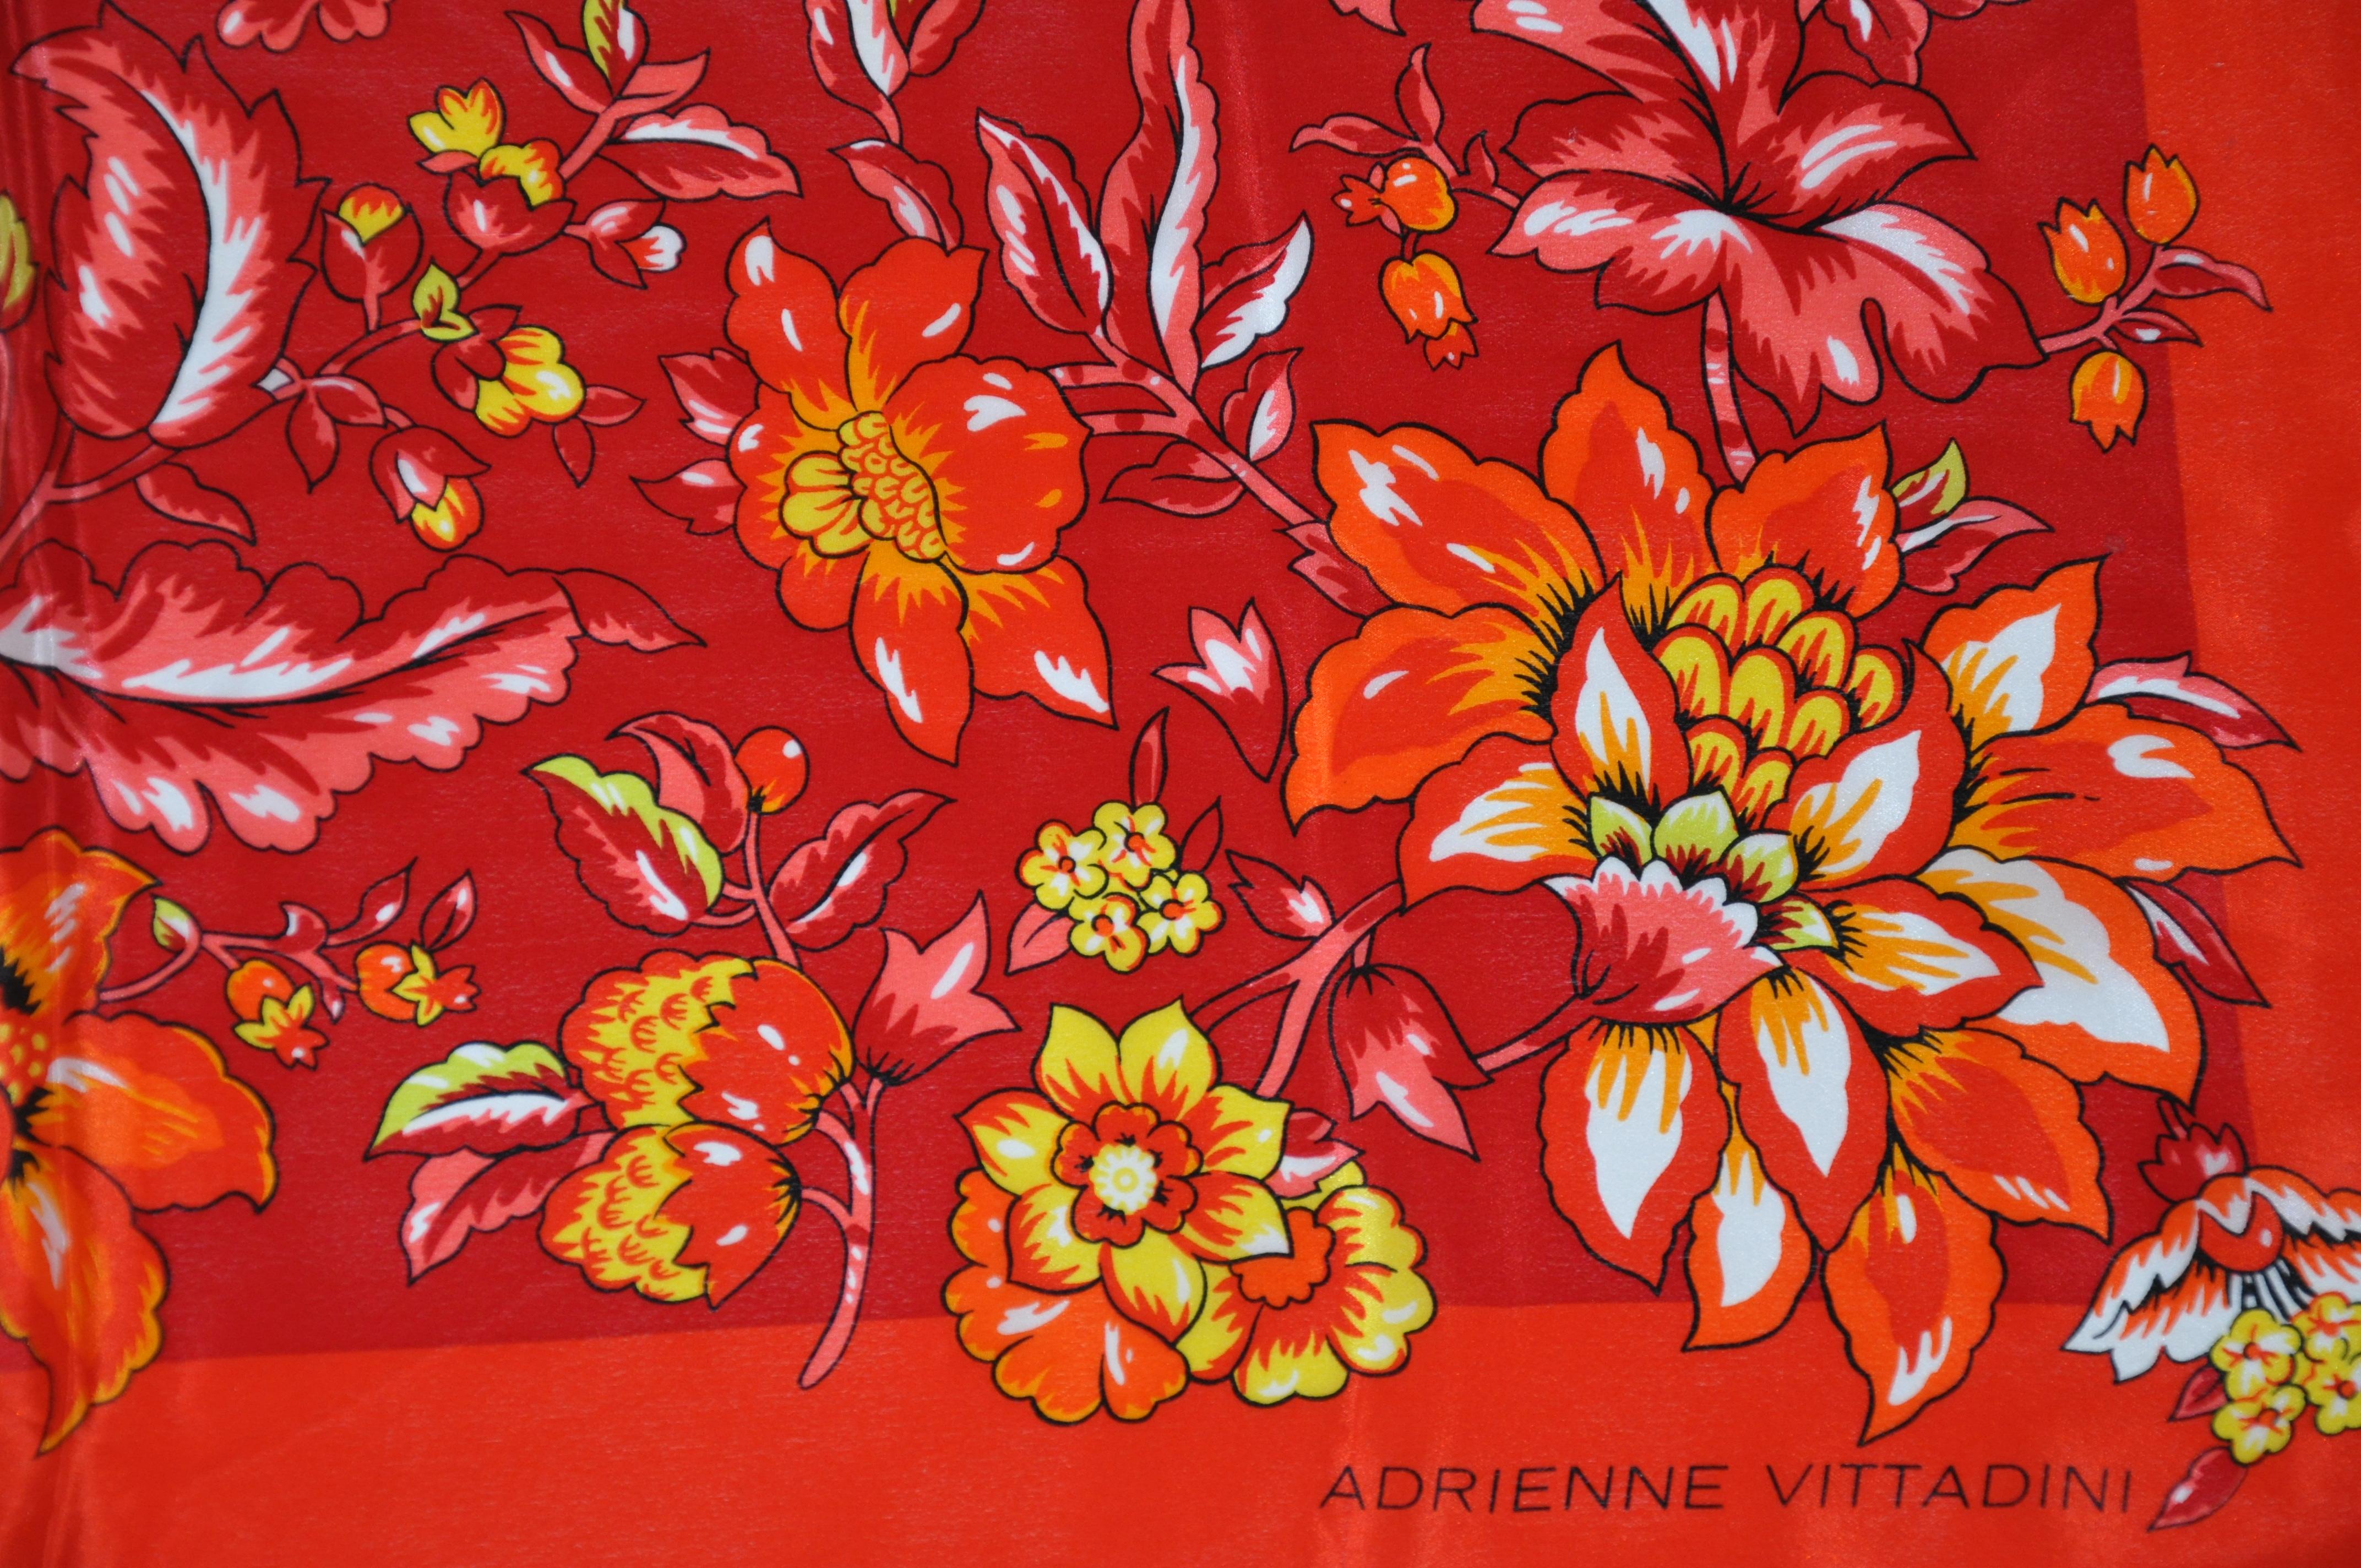 Women's or Men's Adrienne Vittadini Wonderfully Glorious Floral Silk Scarf For Sale